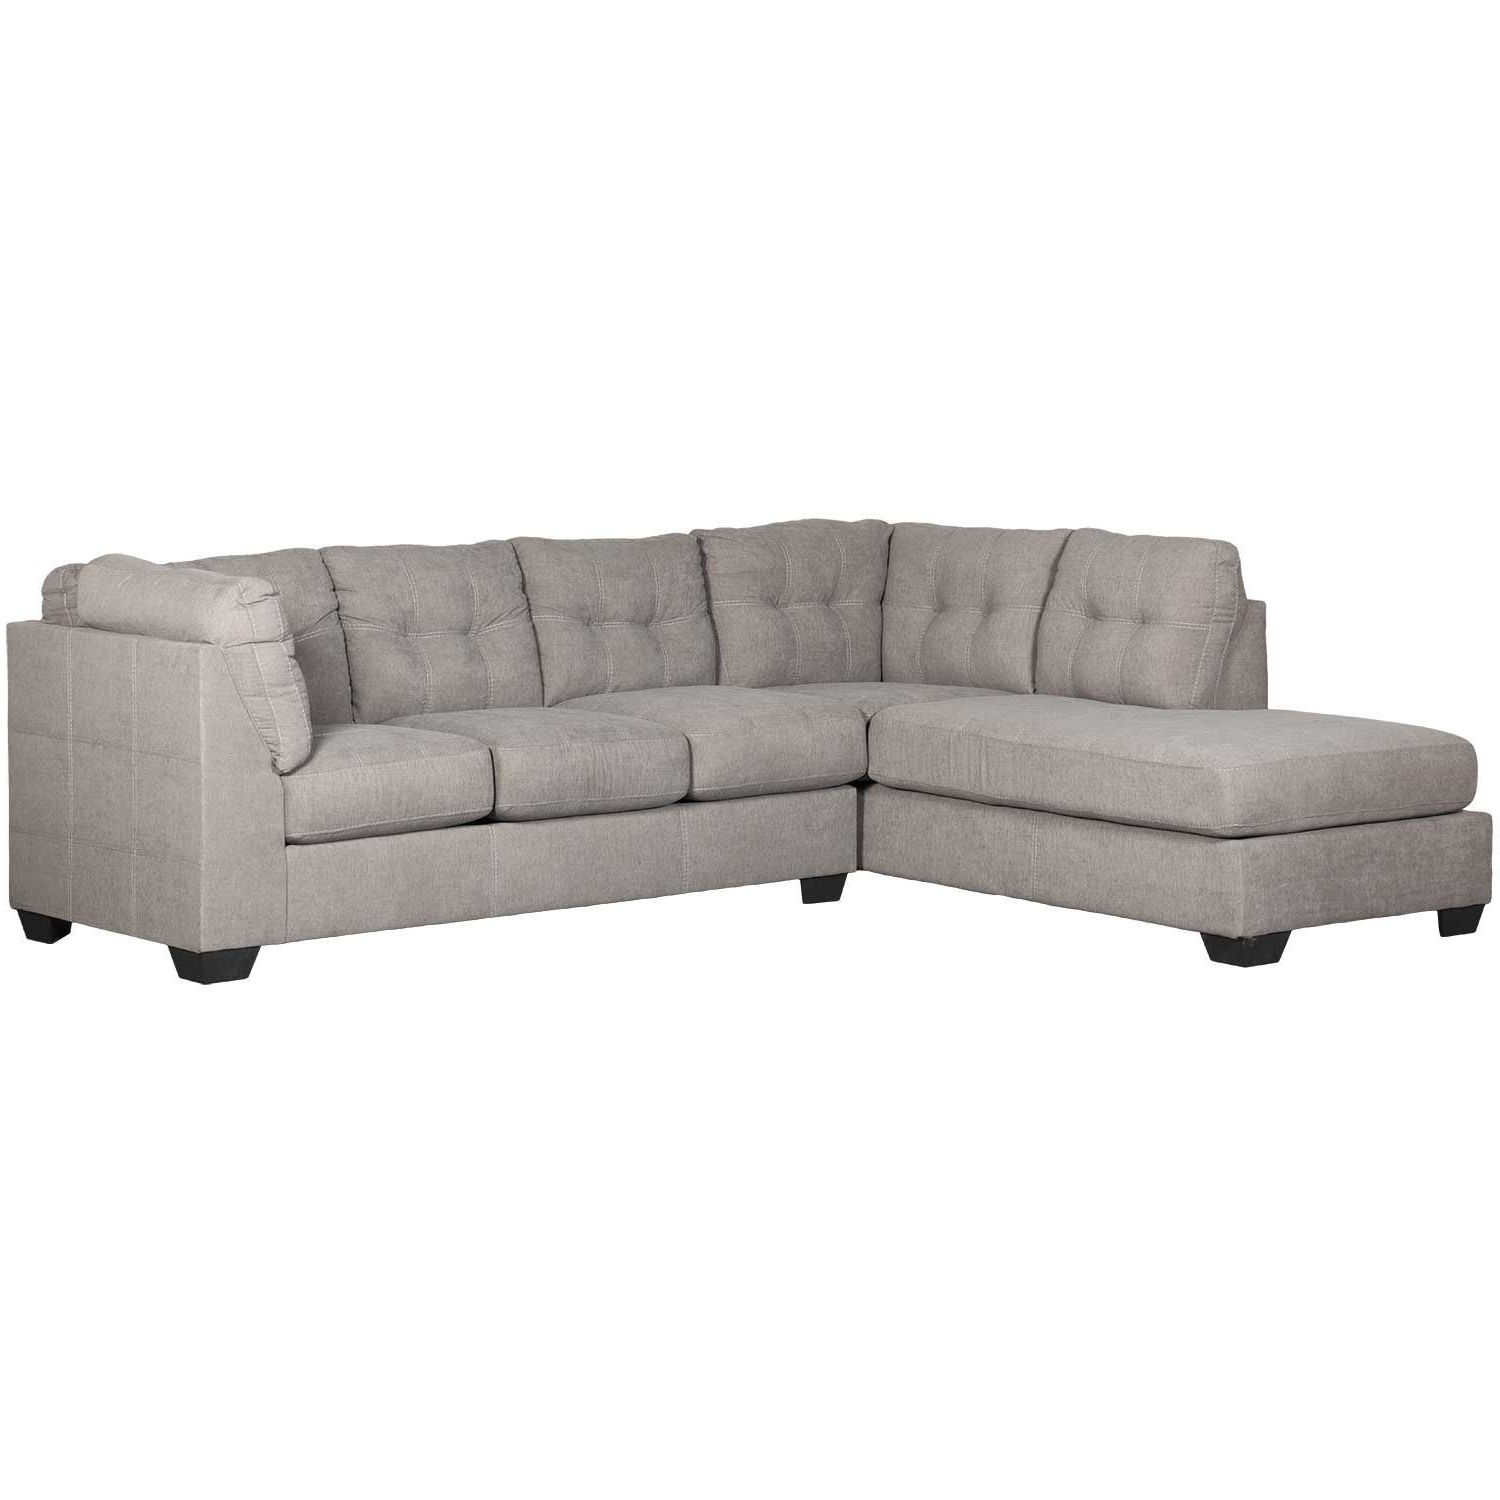 4520016/67 Inside Famous Arrowmask 2 Piece Sectionals With Laf Chaise (View 3 of 20)